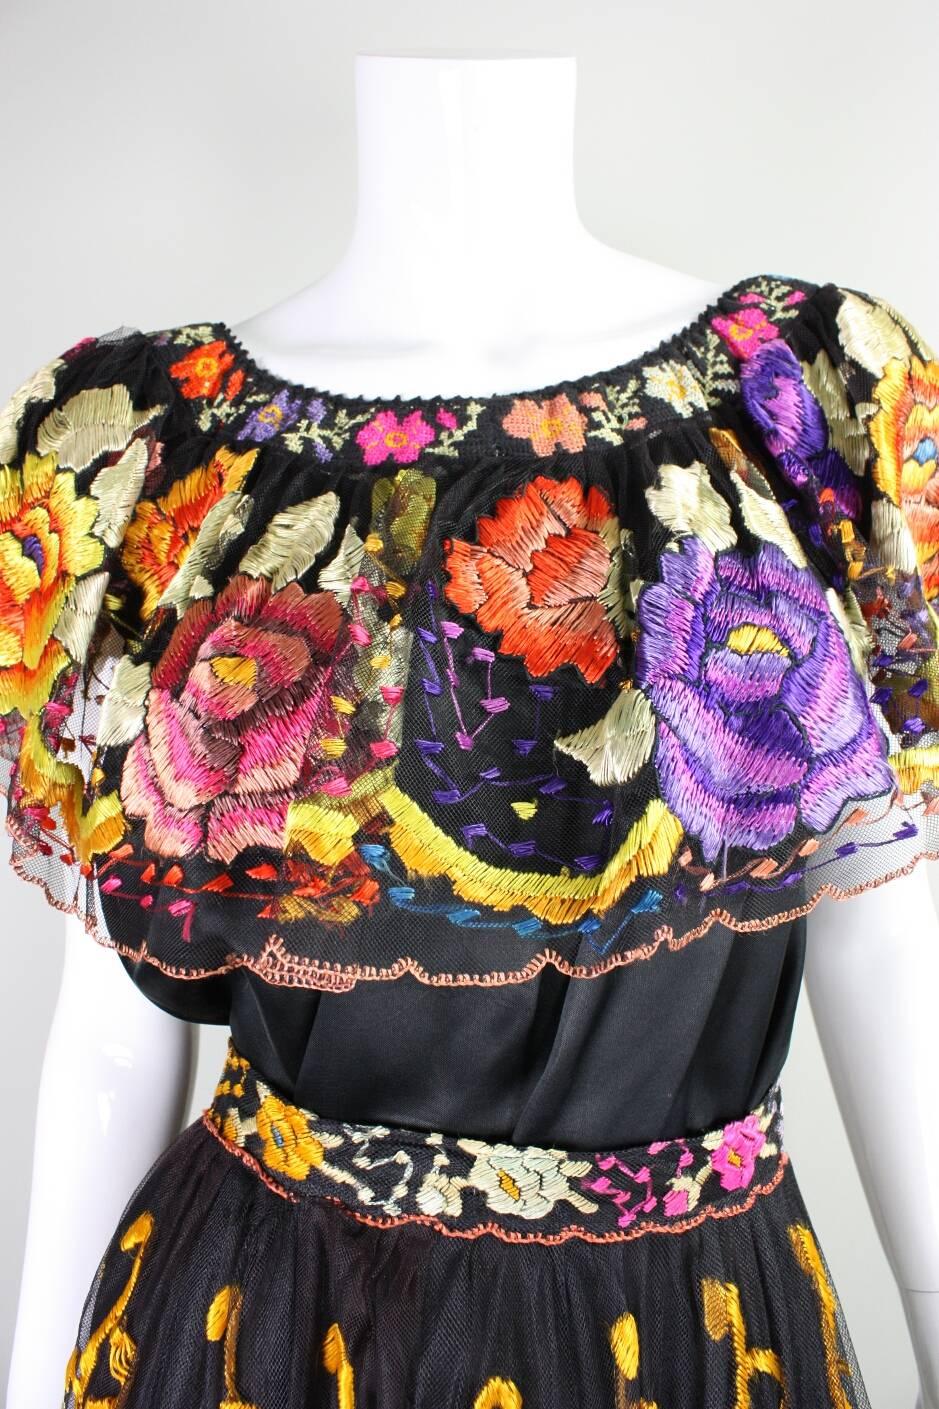 Women's Vintage Mexican Wedding Ensemble with Polychromatic Hand Embroidery